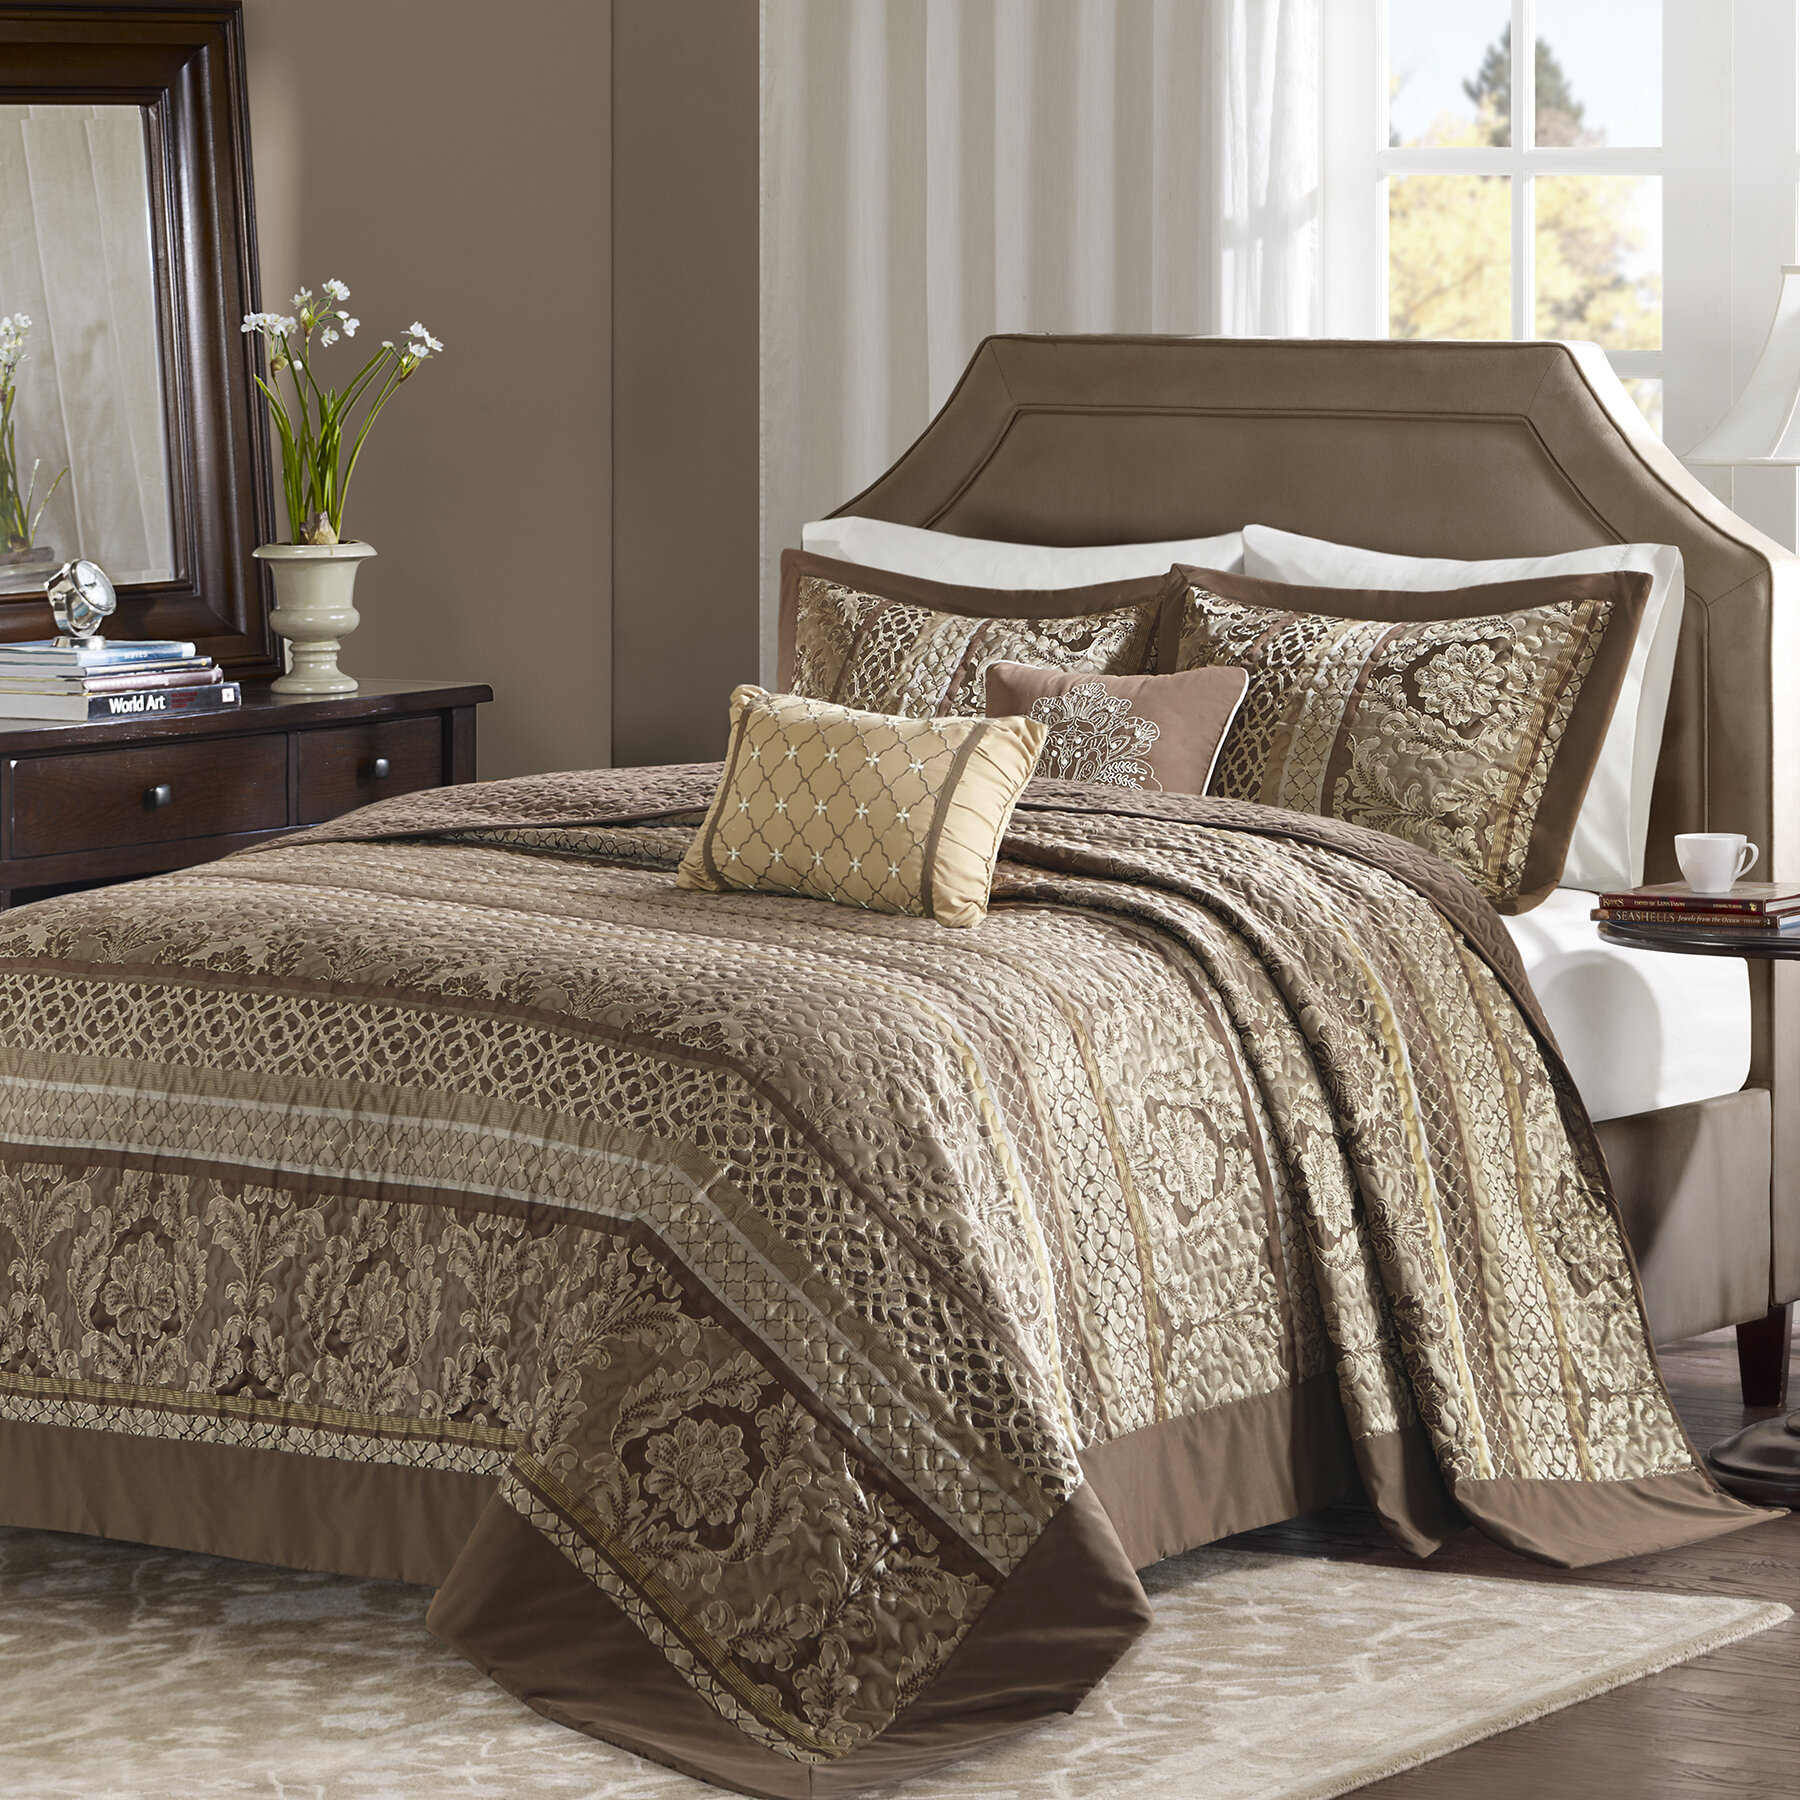 Darby Home Co Oversized Phillipe Coverlet Bedspread Set Reviews